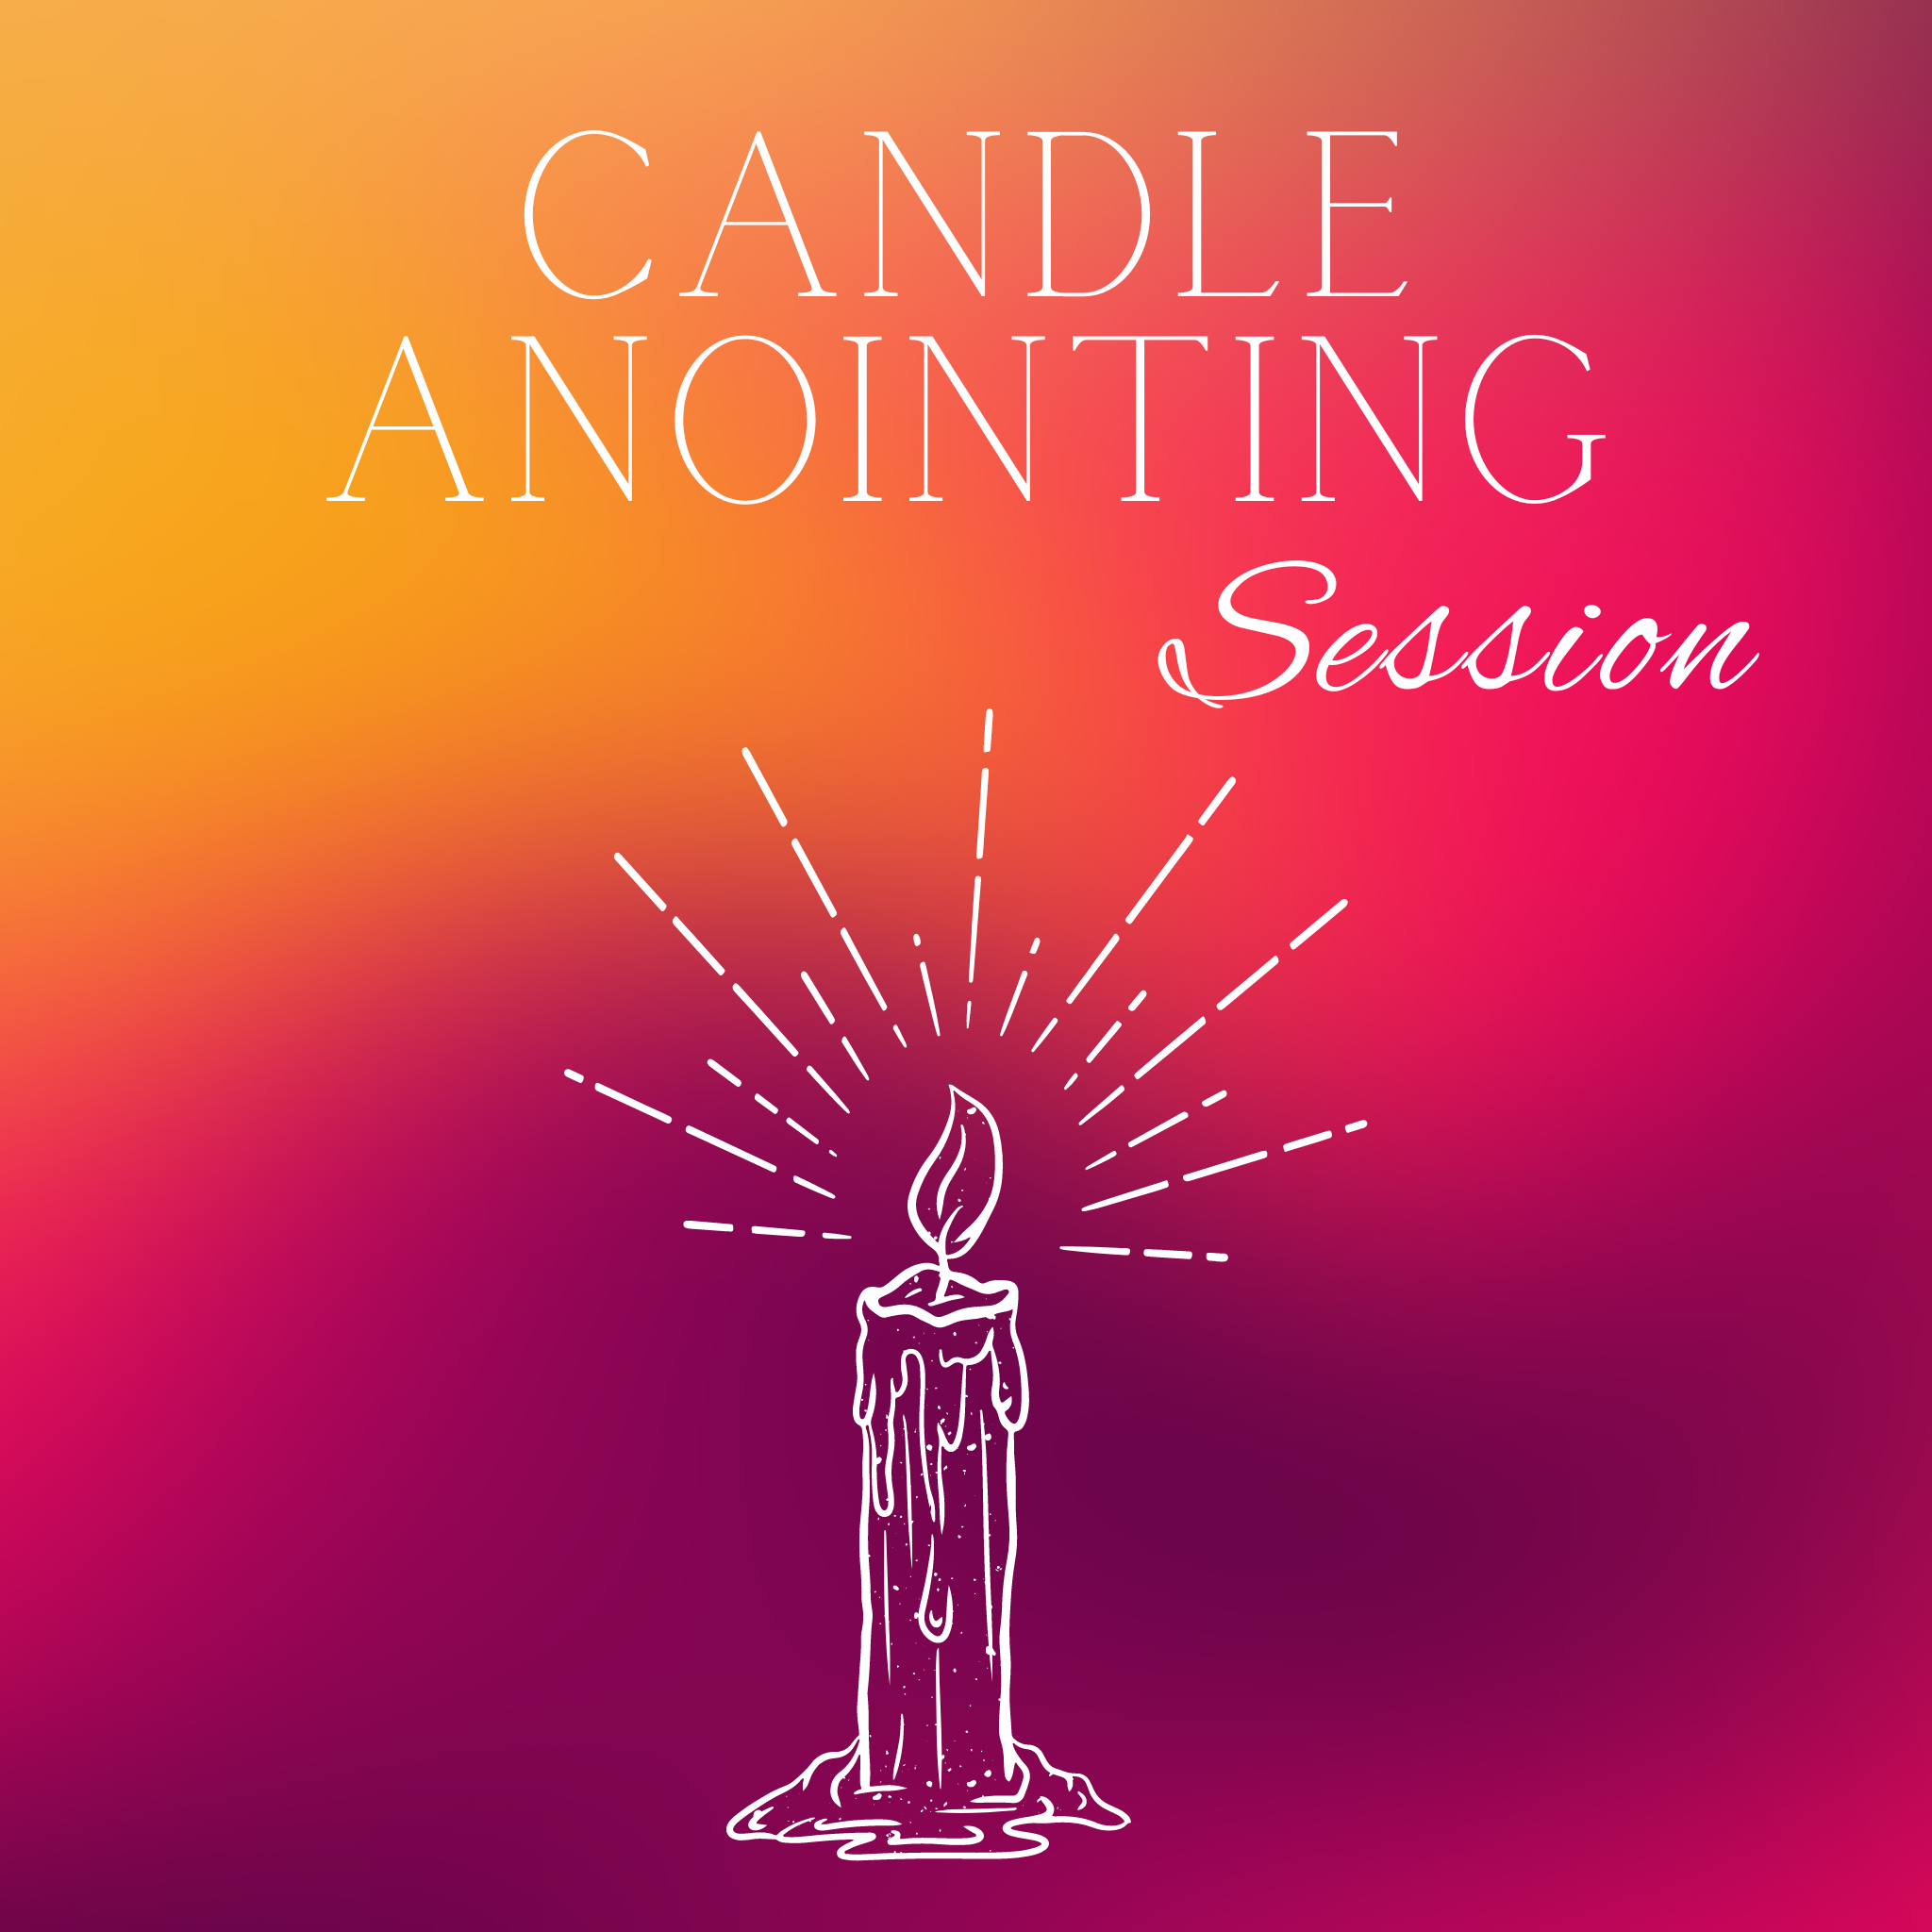 Candle Anointing Session